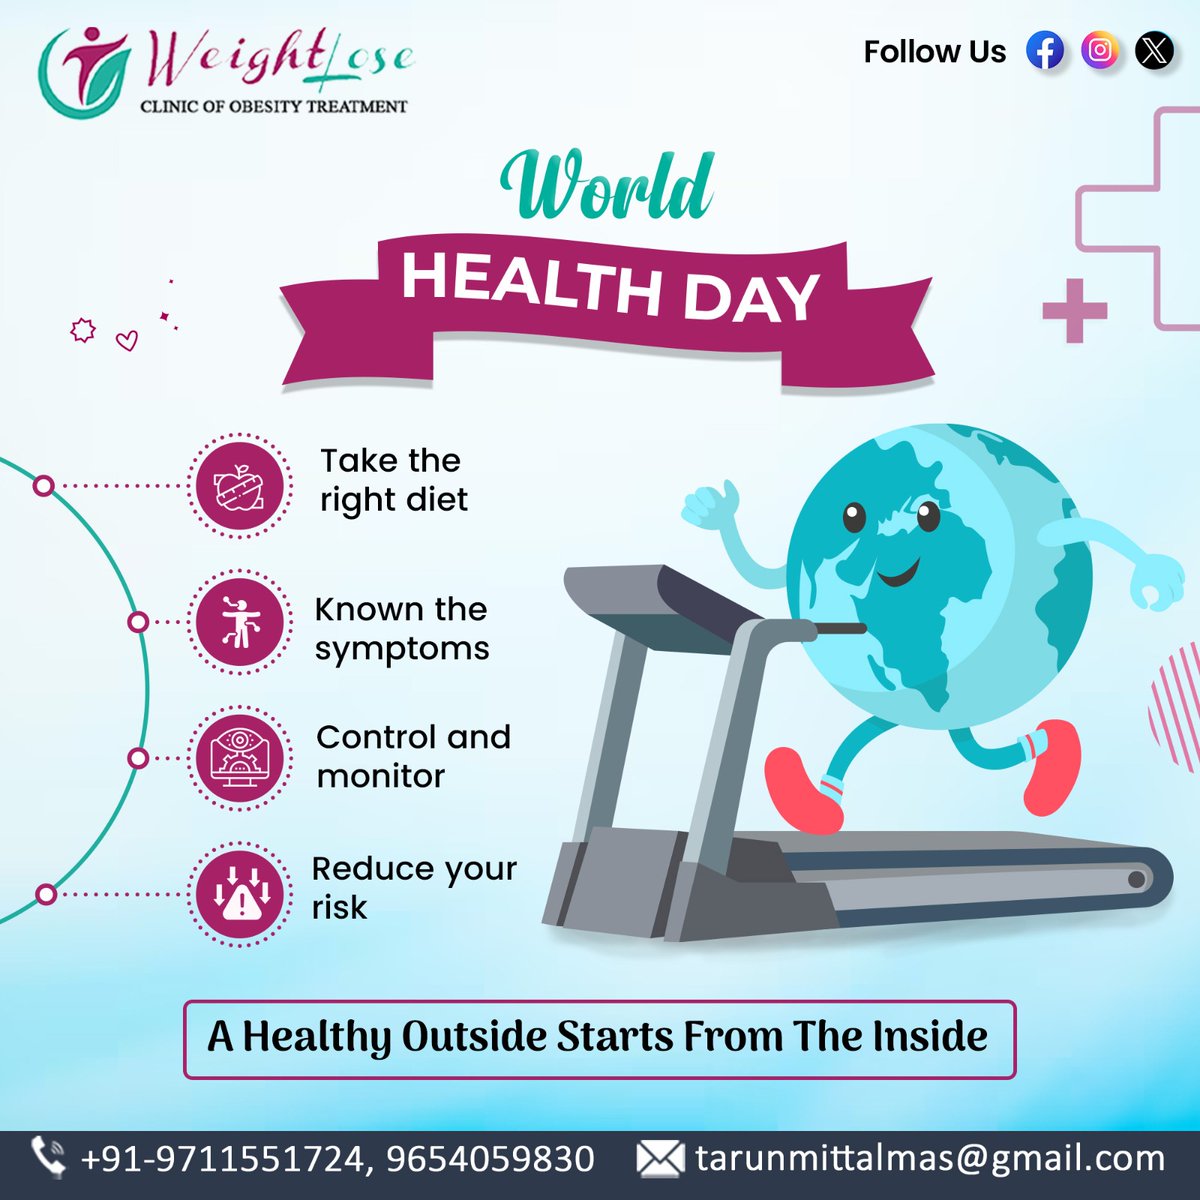 Happy #WorldHealthDay 🌍👨🏻‍⚕️Today and every day, let's prioritize our well-being and make positive choices for our health💪🏻. From our weightloseclinic to you, here's to a journey of wellness 🌿and vitality! 

#HealthForAll #HealthyLiving #GlobalHealth #PublicHealth